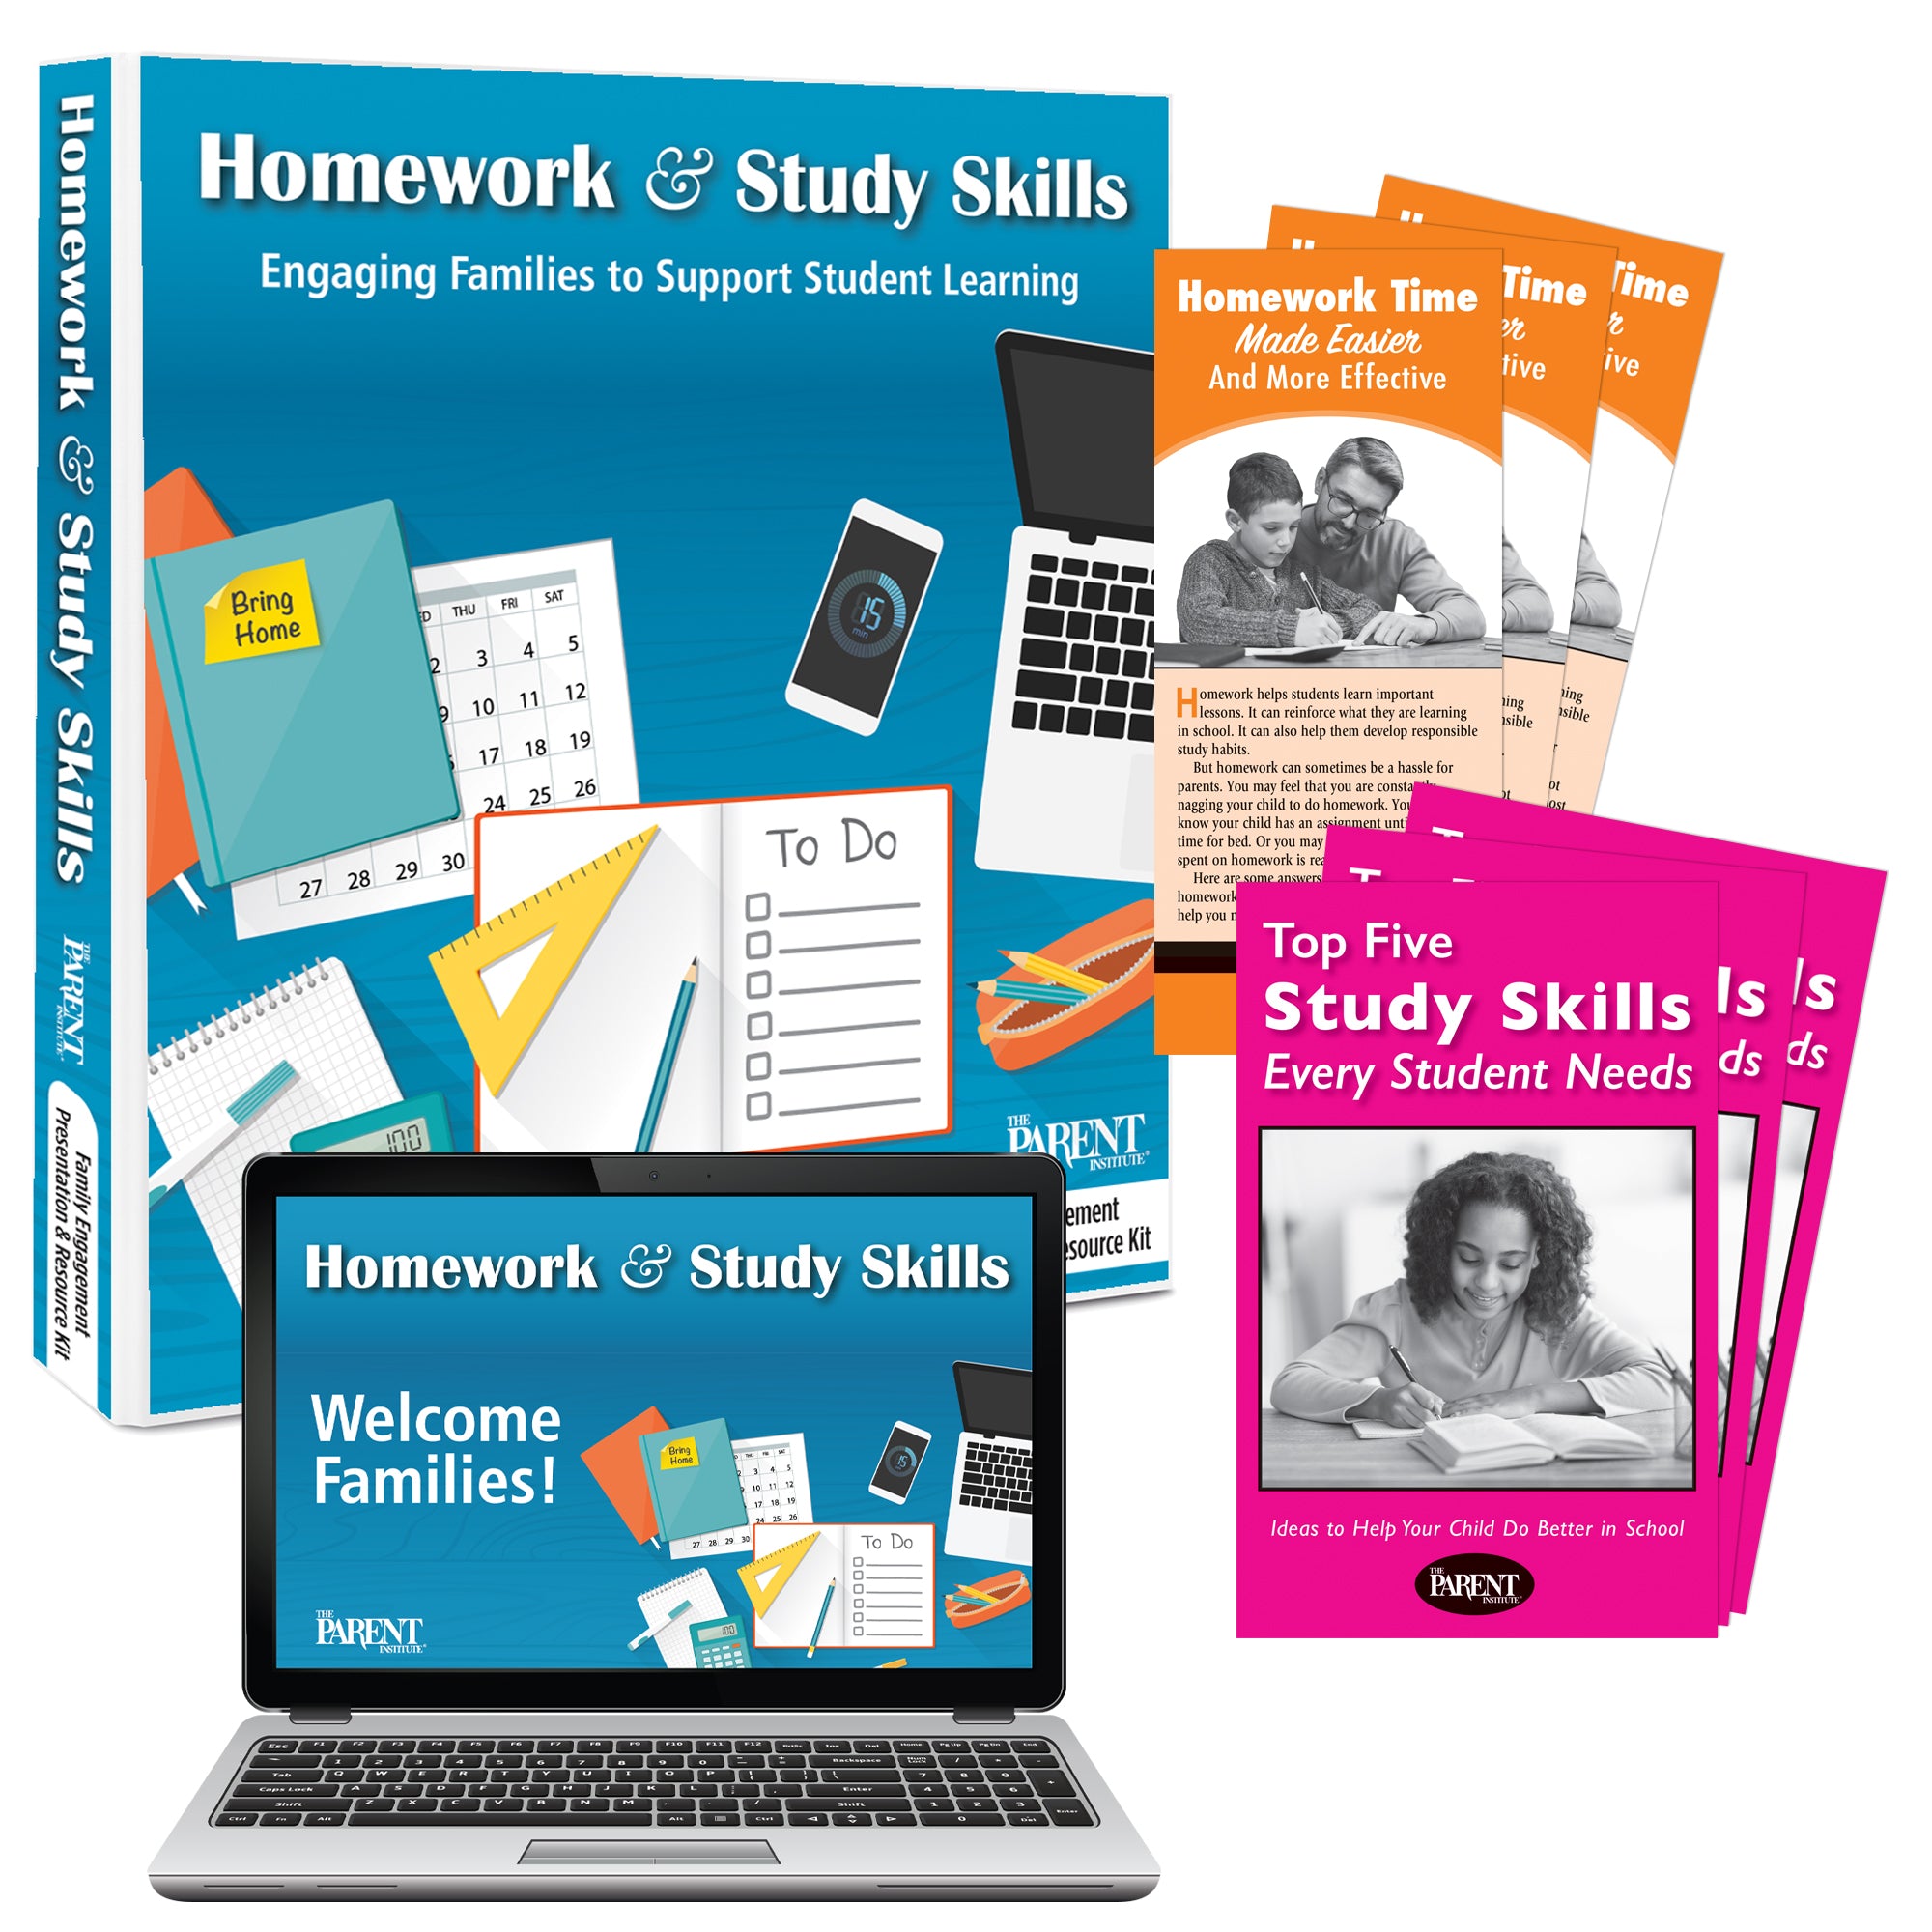 Homework & Study Skills: Engaging Families to Support Student Learning Resource Kit